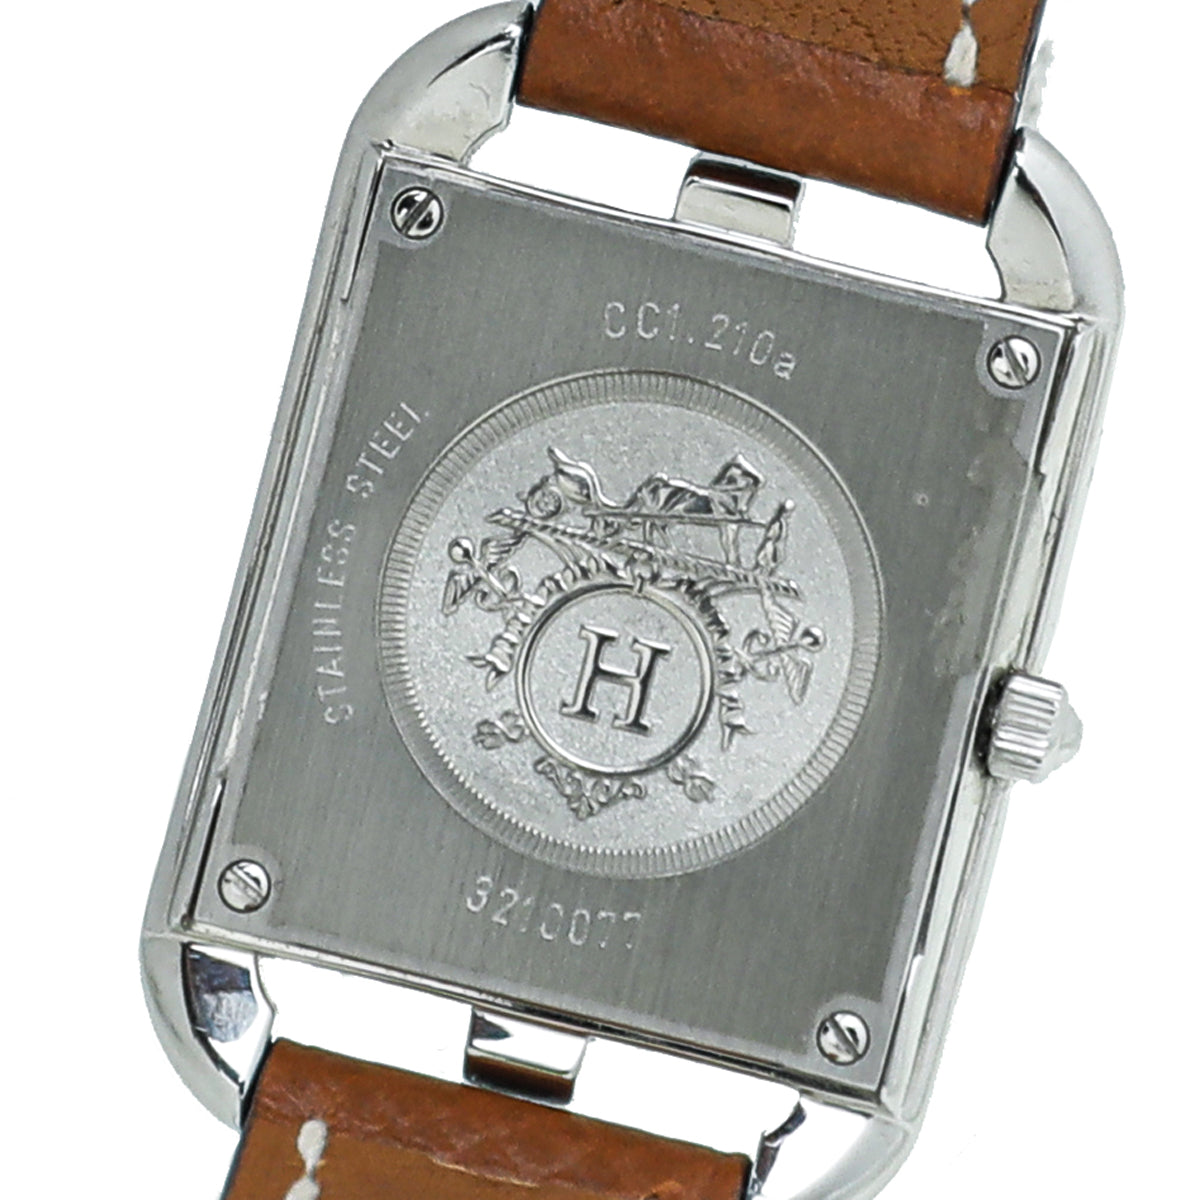 Hermes ST.ST Gold Cape Cod 35mm Watch